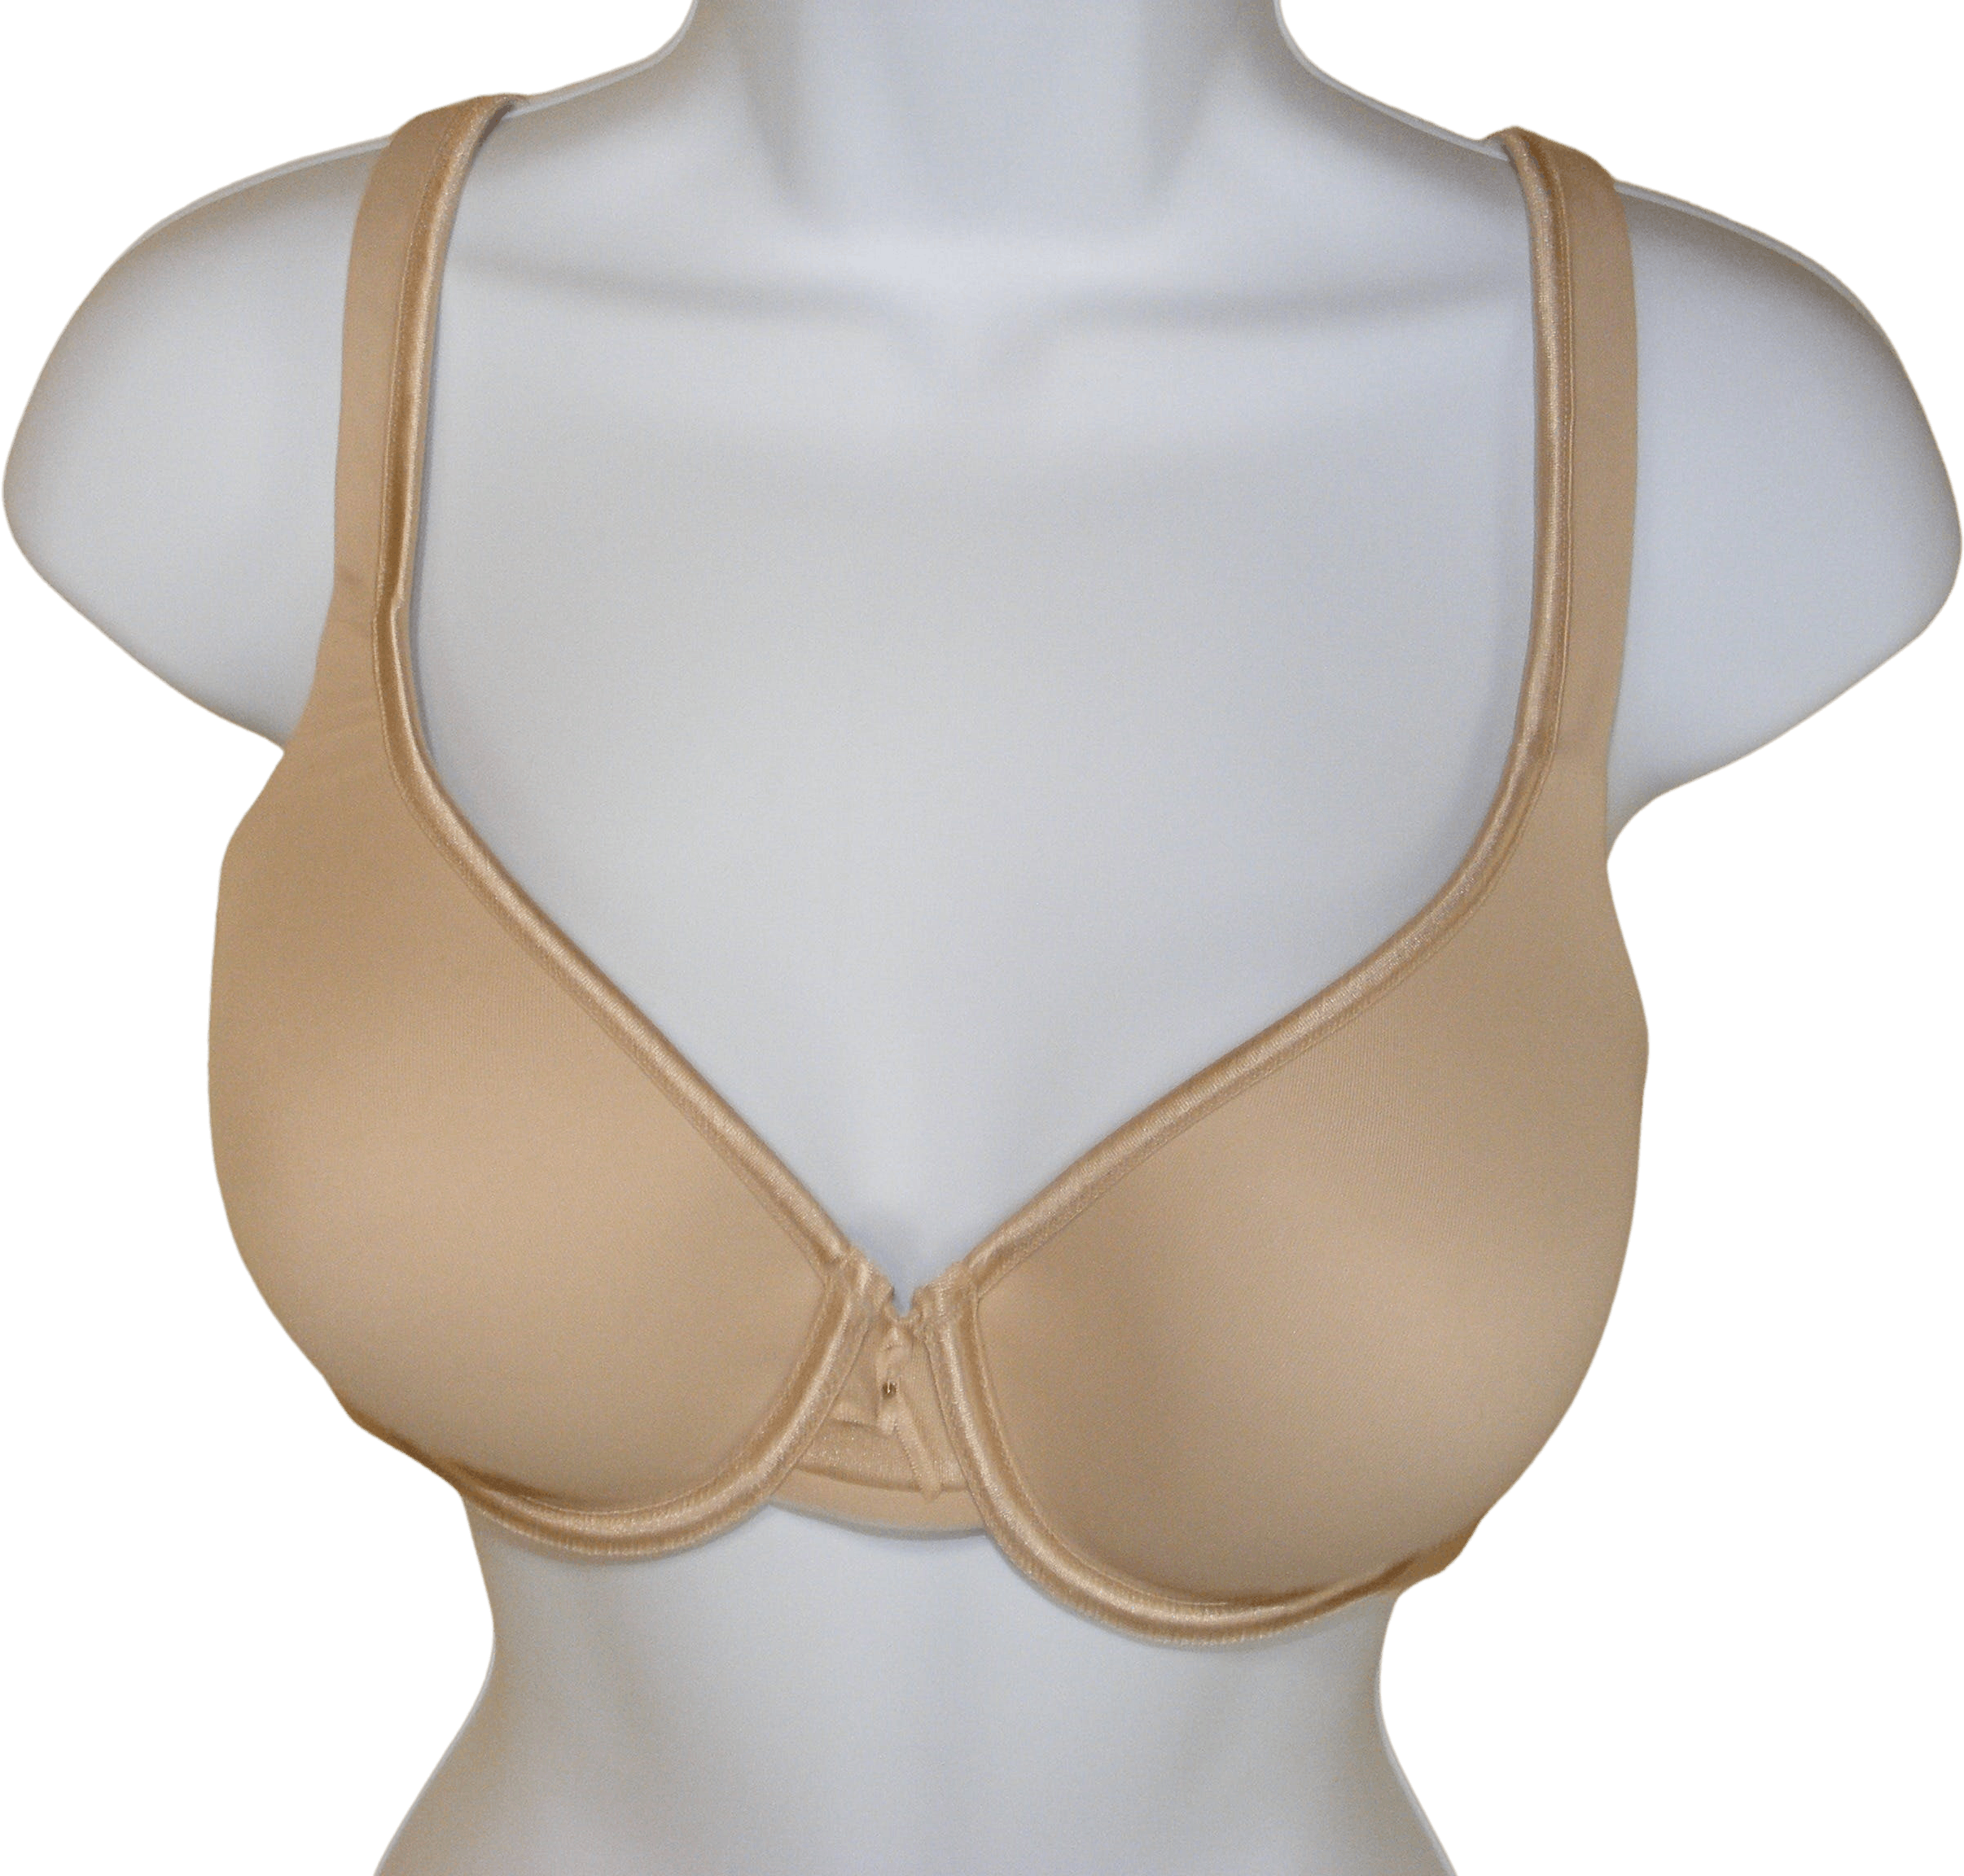 http://shopthrilling.com/cdn/shop/products/90-s-underwire-bra-38-b-beige-deadstock-by-vanity-fair-by-vanity-fair-product-image__E7wXH8.png?v=1641146241